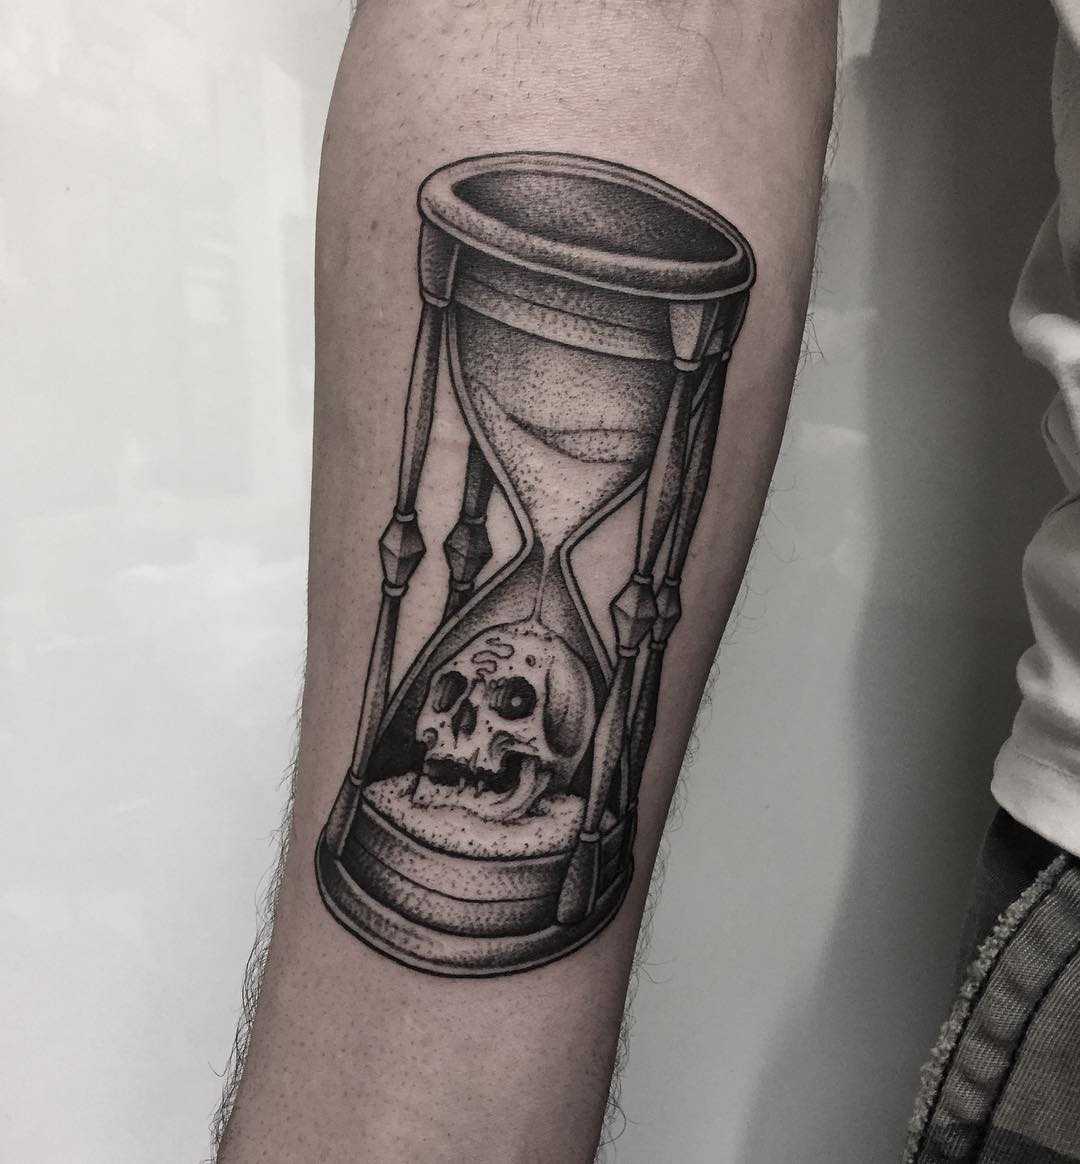 Hourglass and skull done at Primordial Pain Tattoo